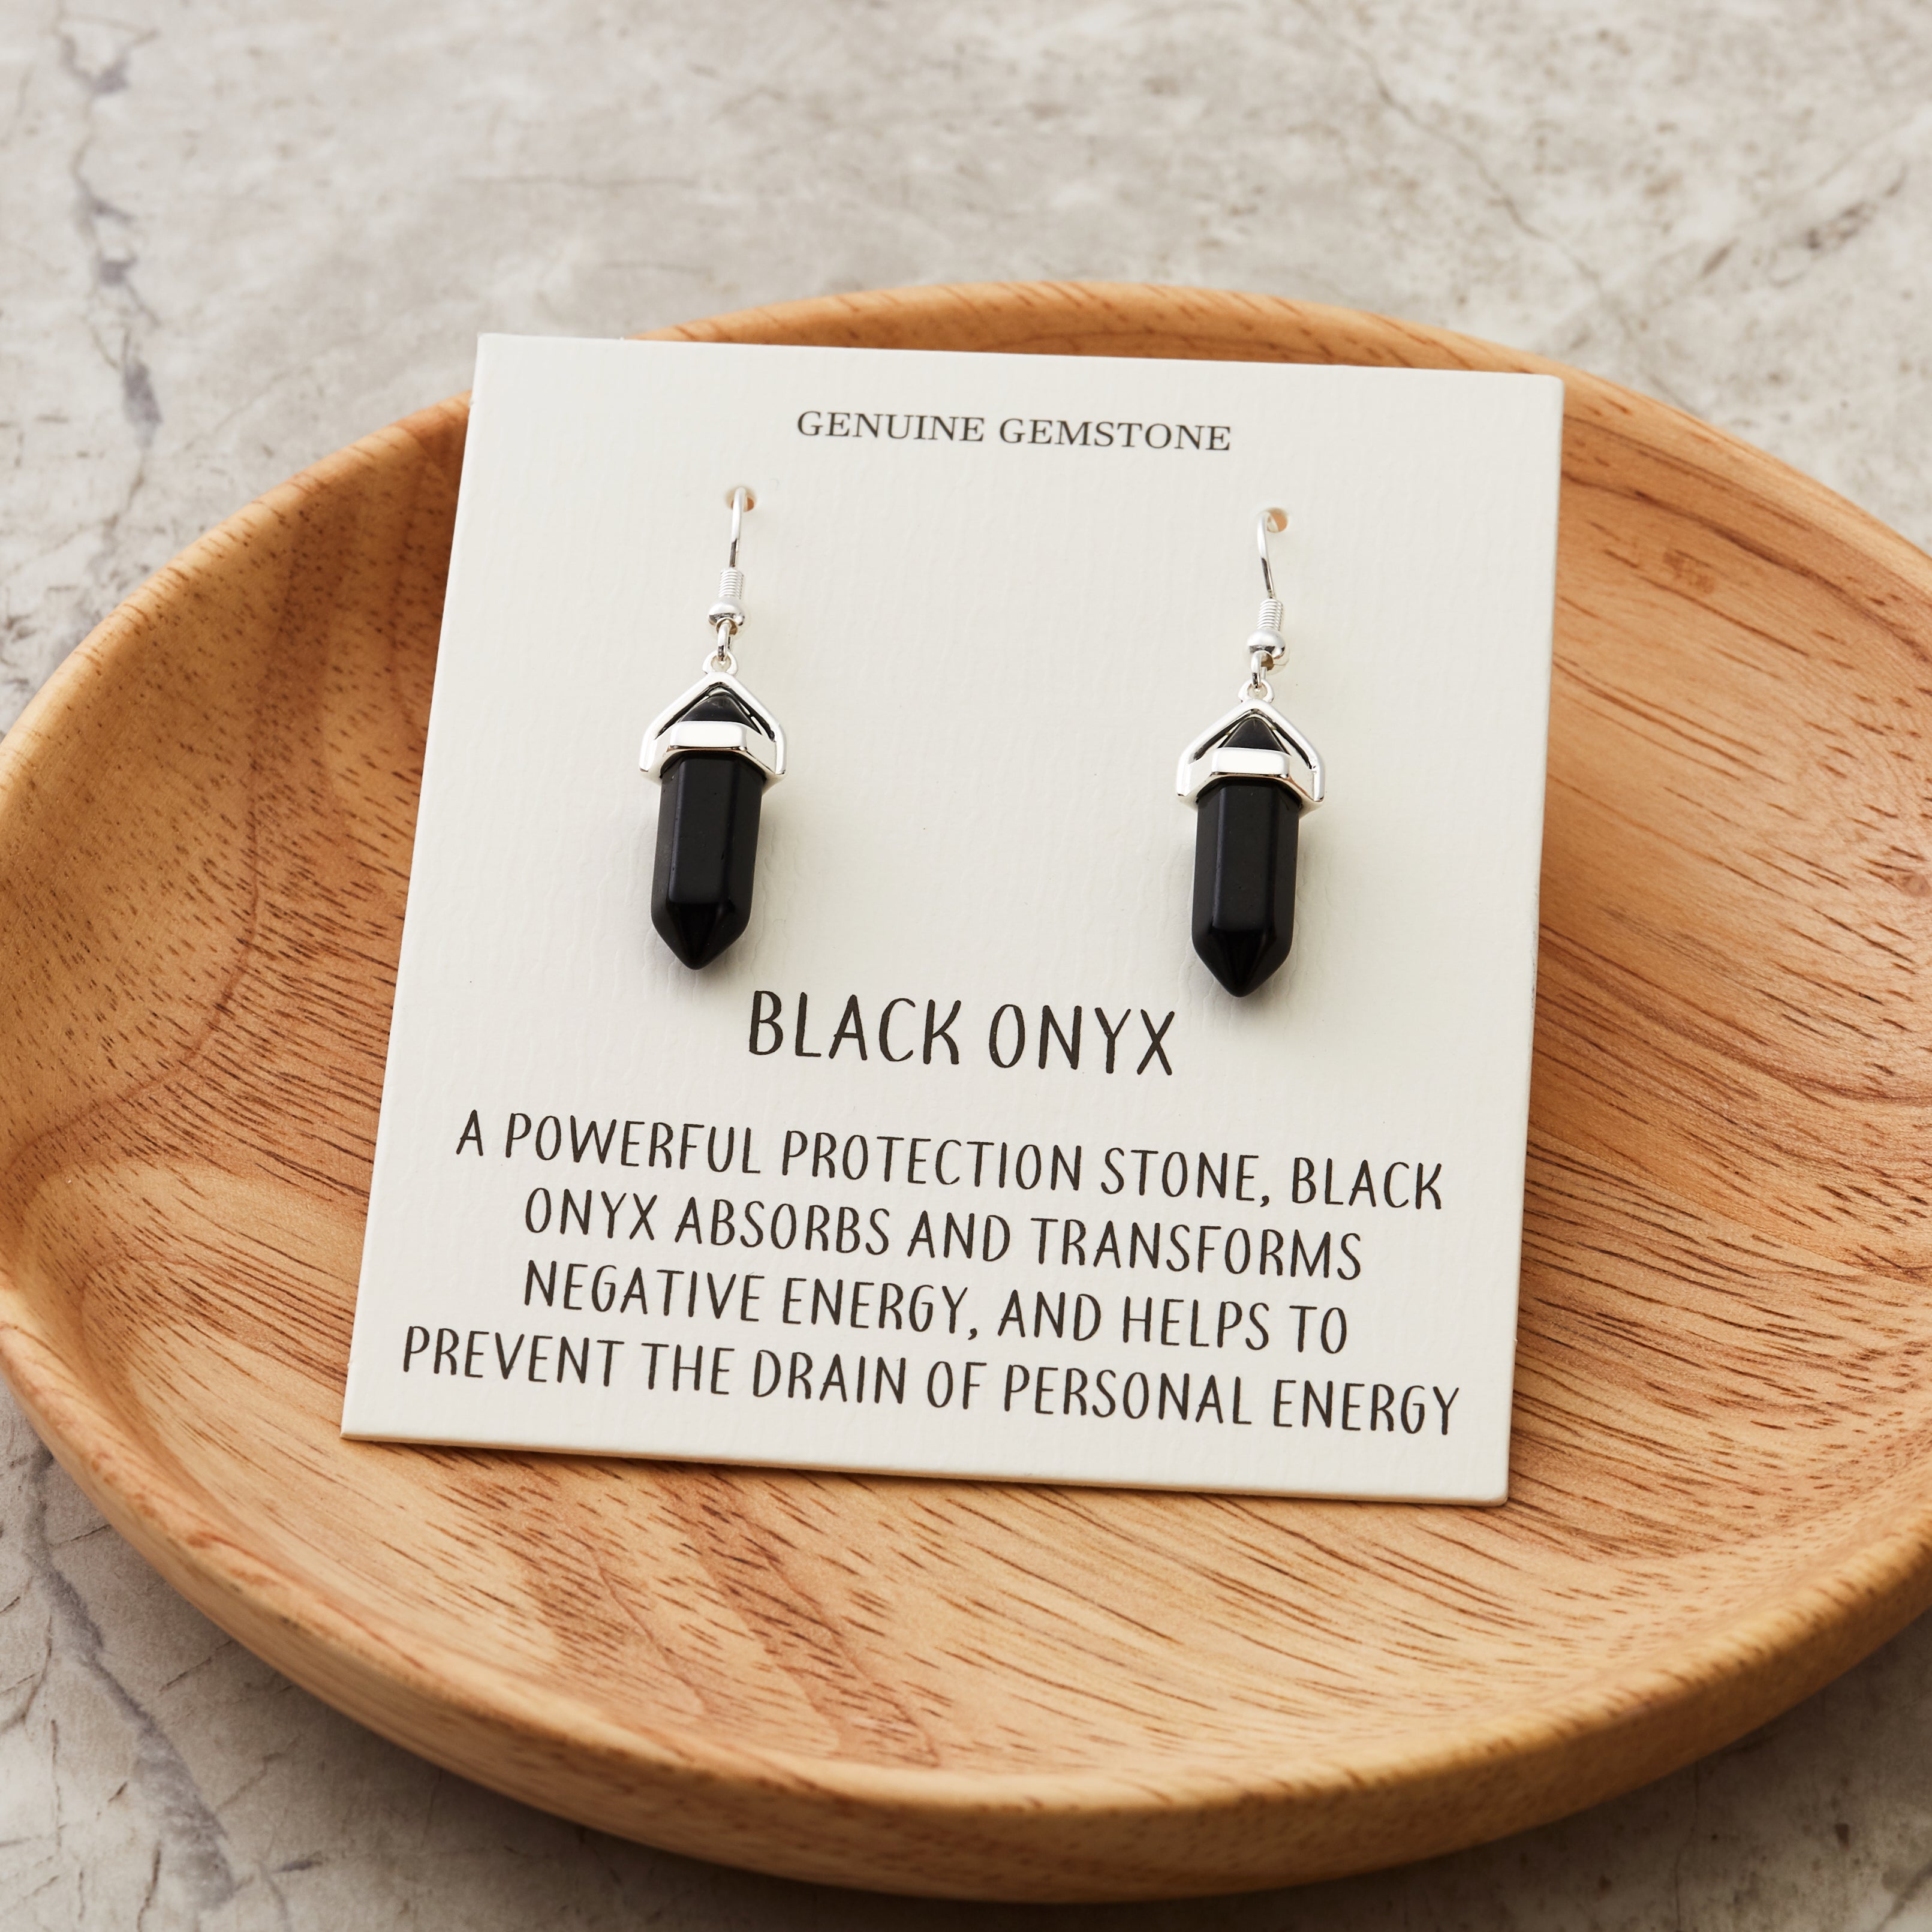 Black Onyx Gemstone Drop Earrings with Quote Card